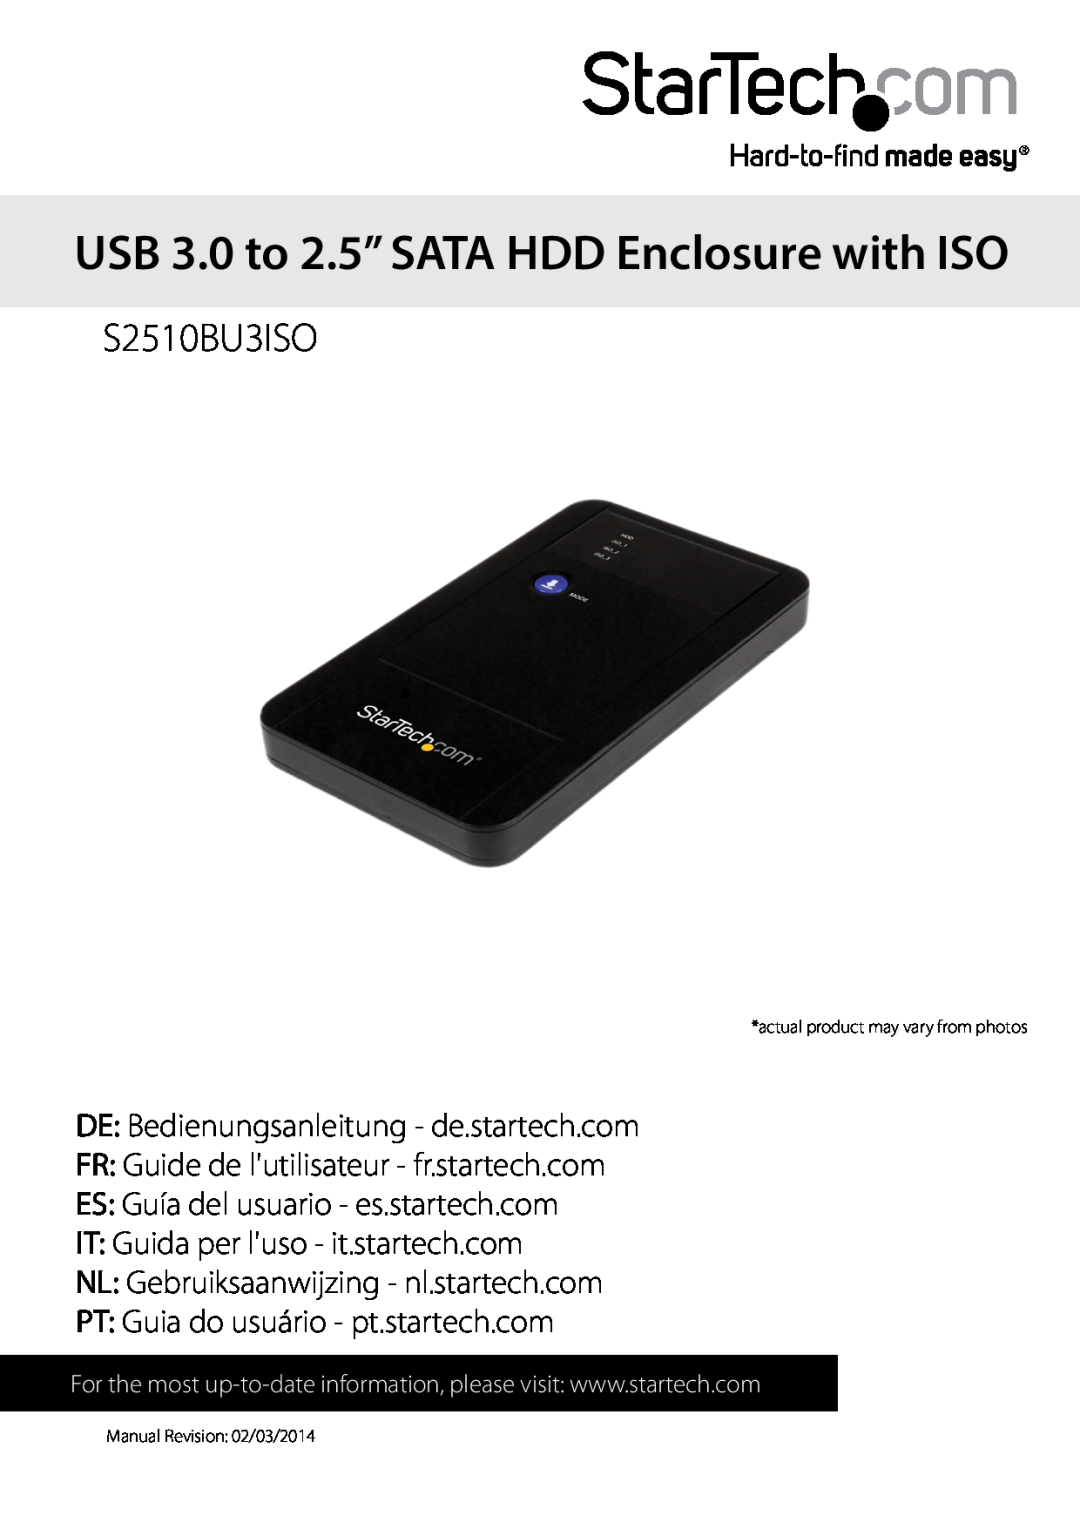 StarTech.com usb 3.0 to 2.5" sata hdd enclosure with iso manual USB 3.0 to 2.5” SATA HDD Enclosure with ISO, S2510BU3ISO 